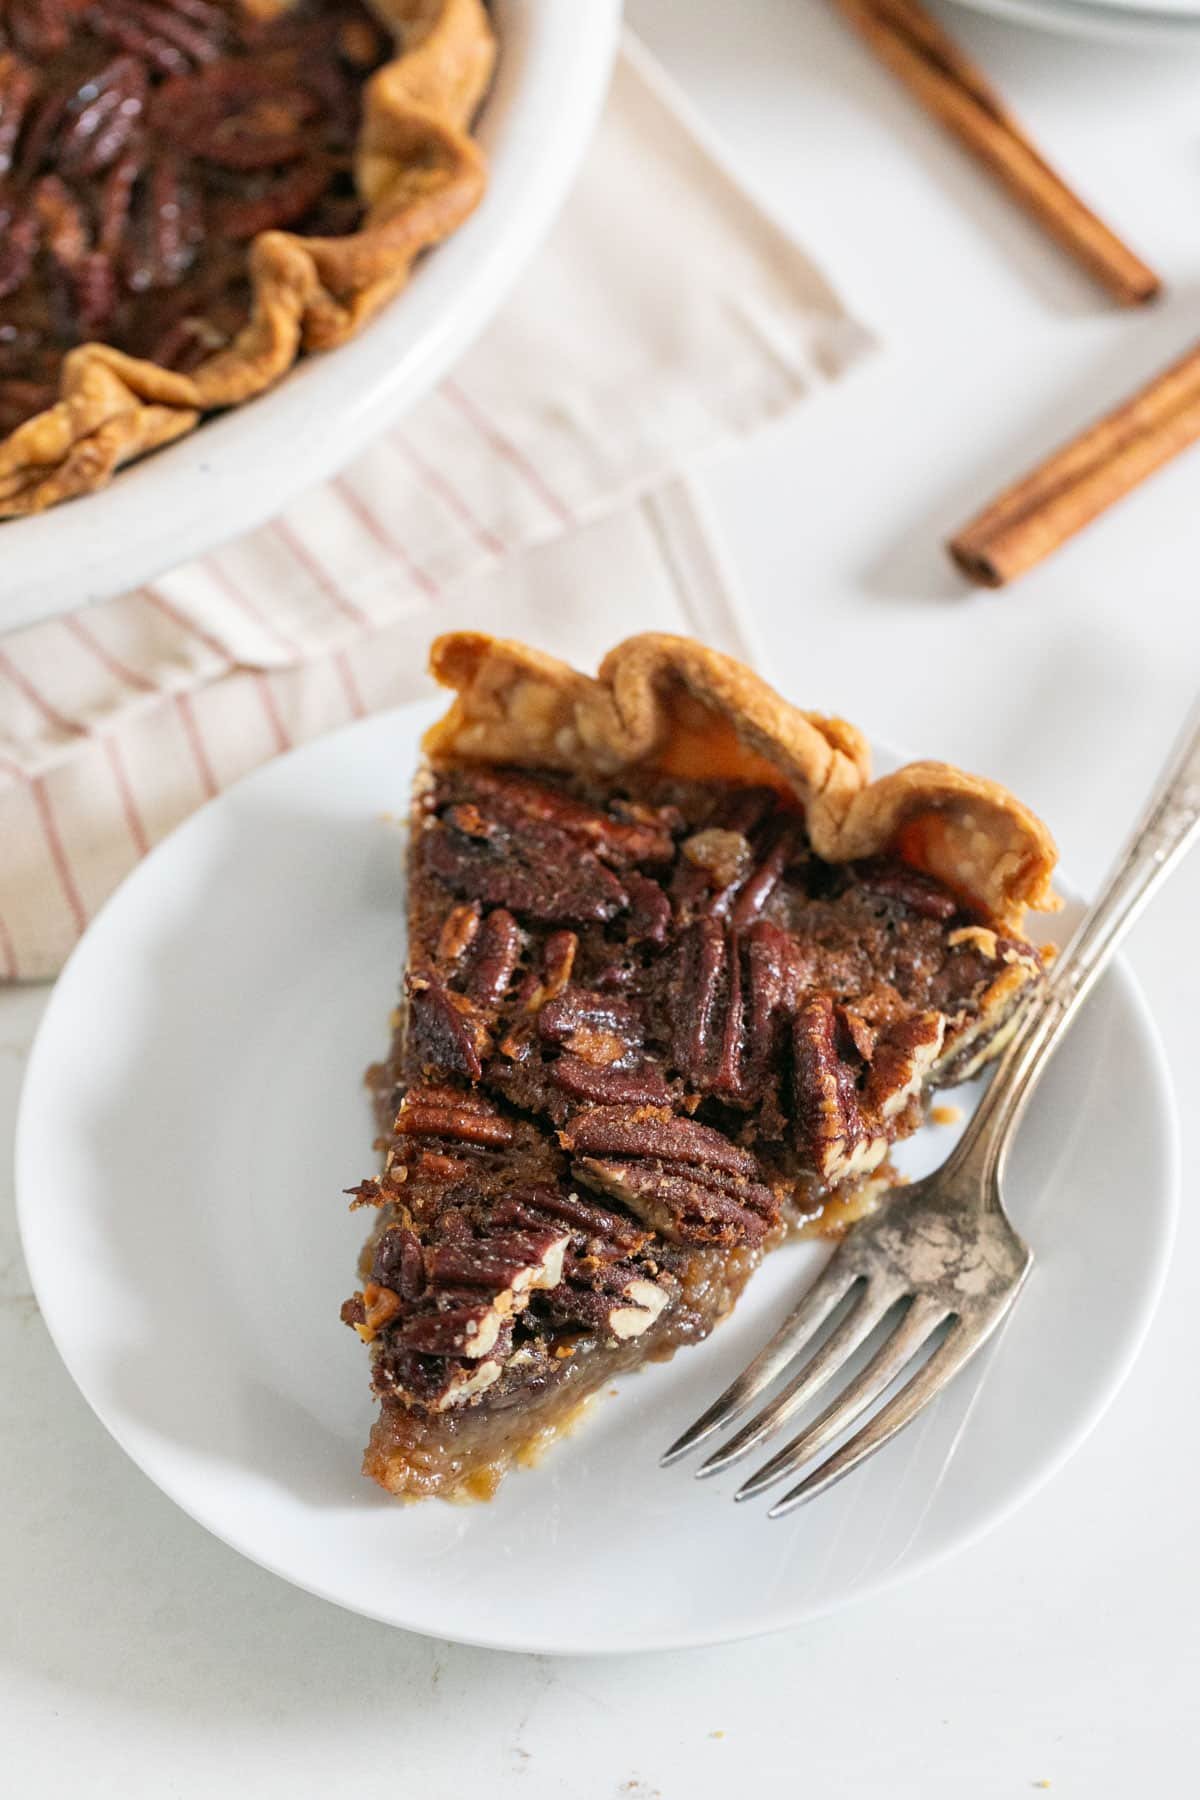 A slice of pecan pie on a white plate with a fork on it and the rest of the pie behind it.